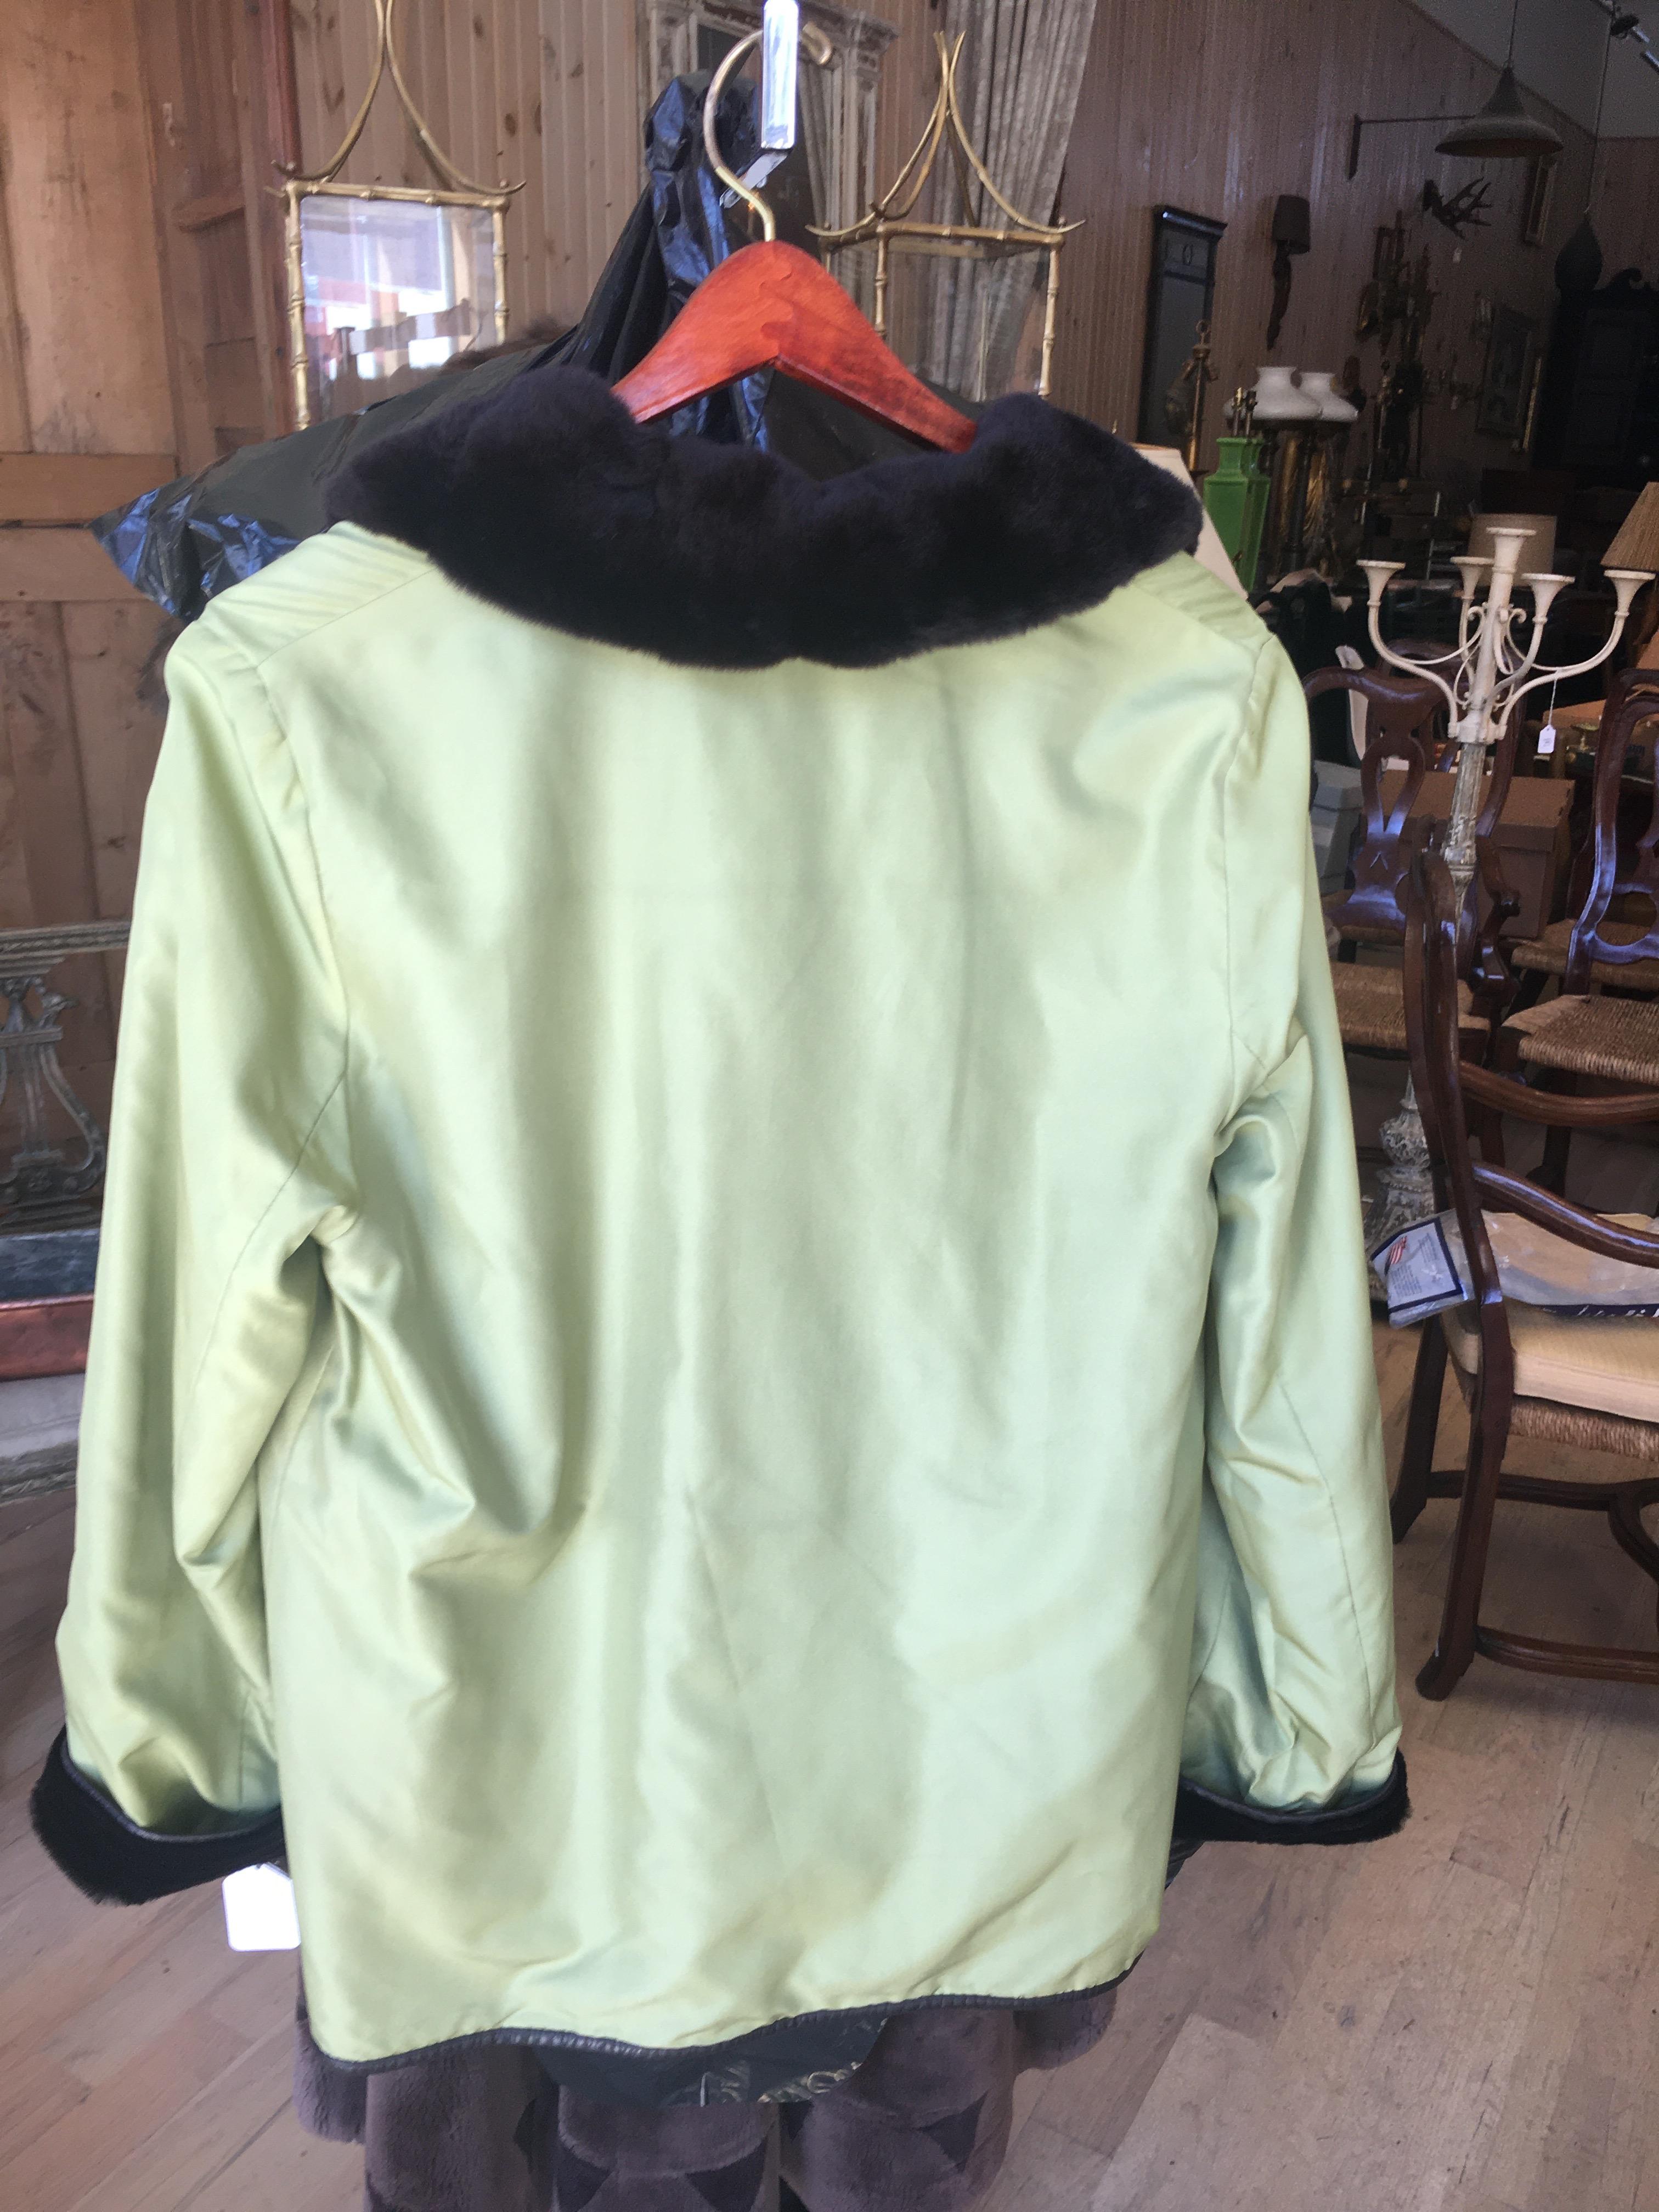 Very Chic Reversible Green Nylon, Black Leather and Sheared Rabbit Coat In Good Condition For Sale In Buchanan, MI